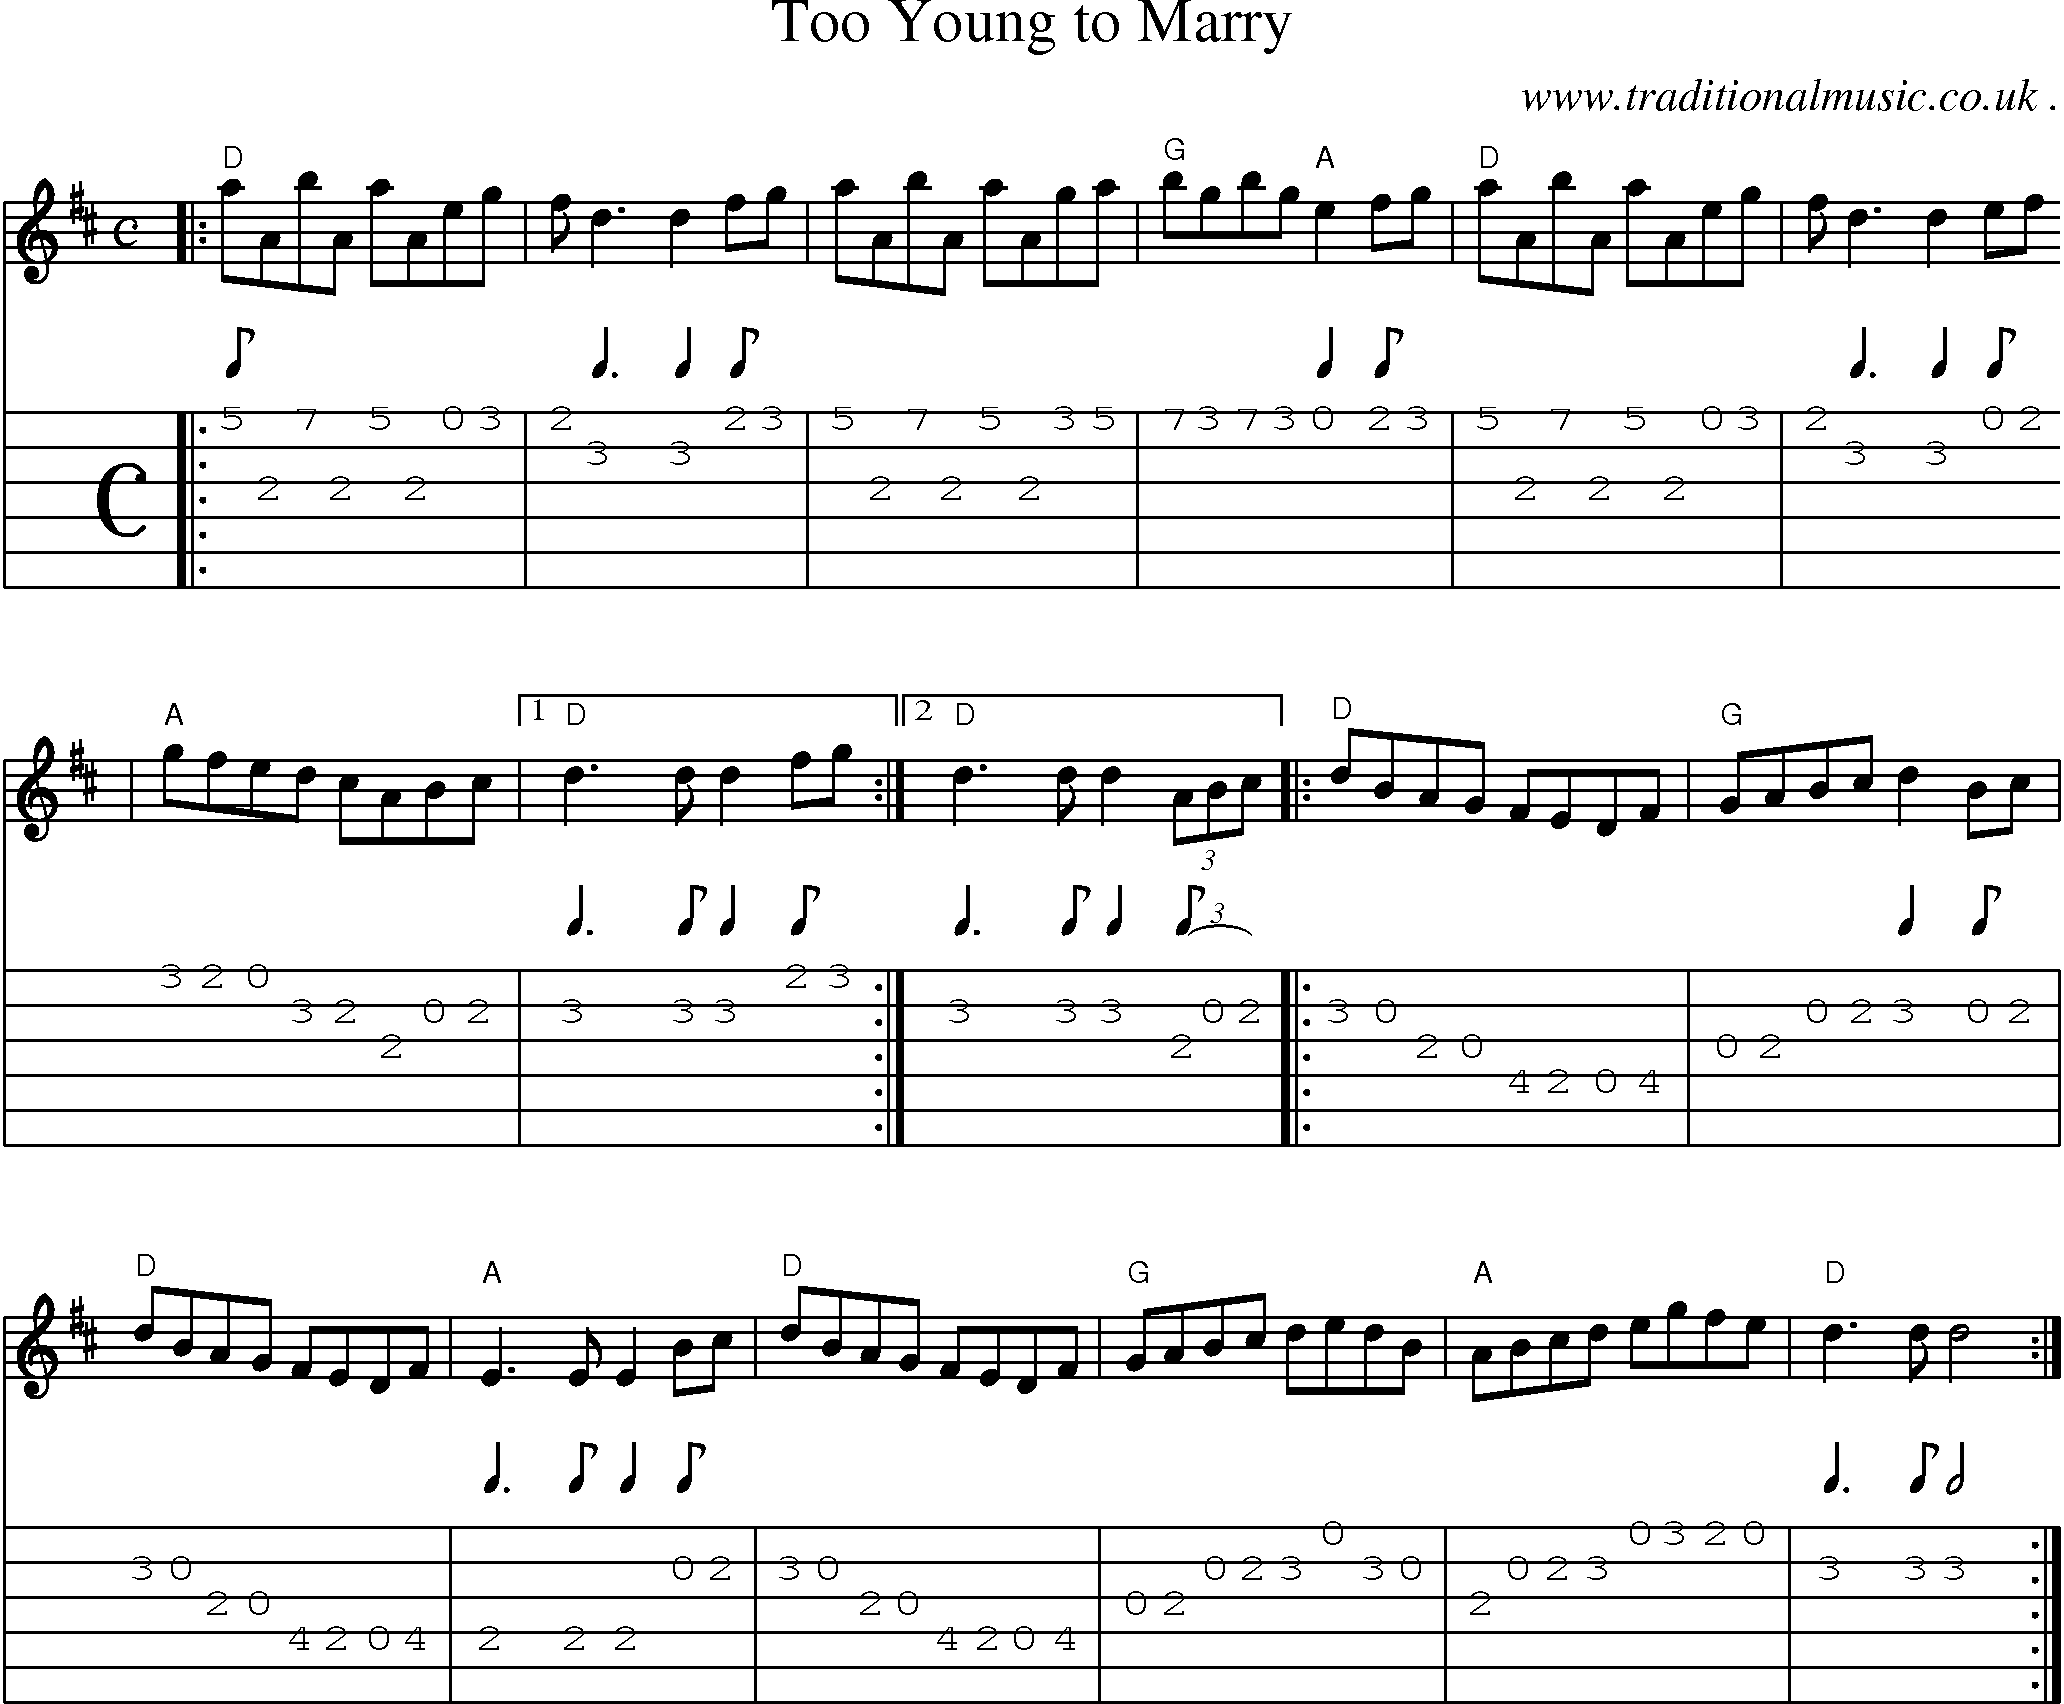 Sheet-music  score, Chords and Guitar Tabs for Too Young To Marry